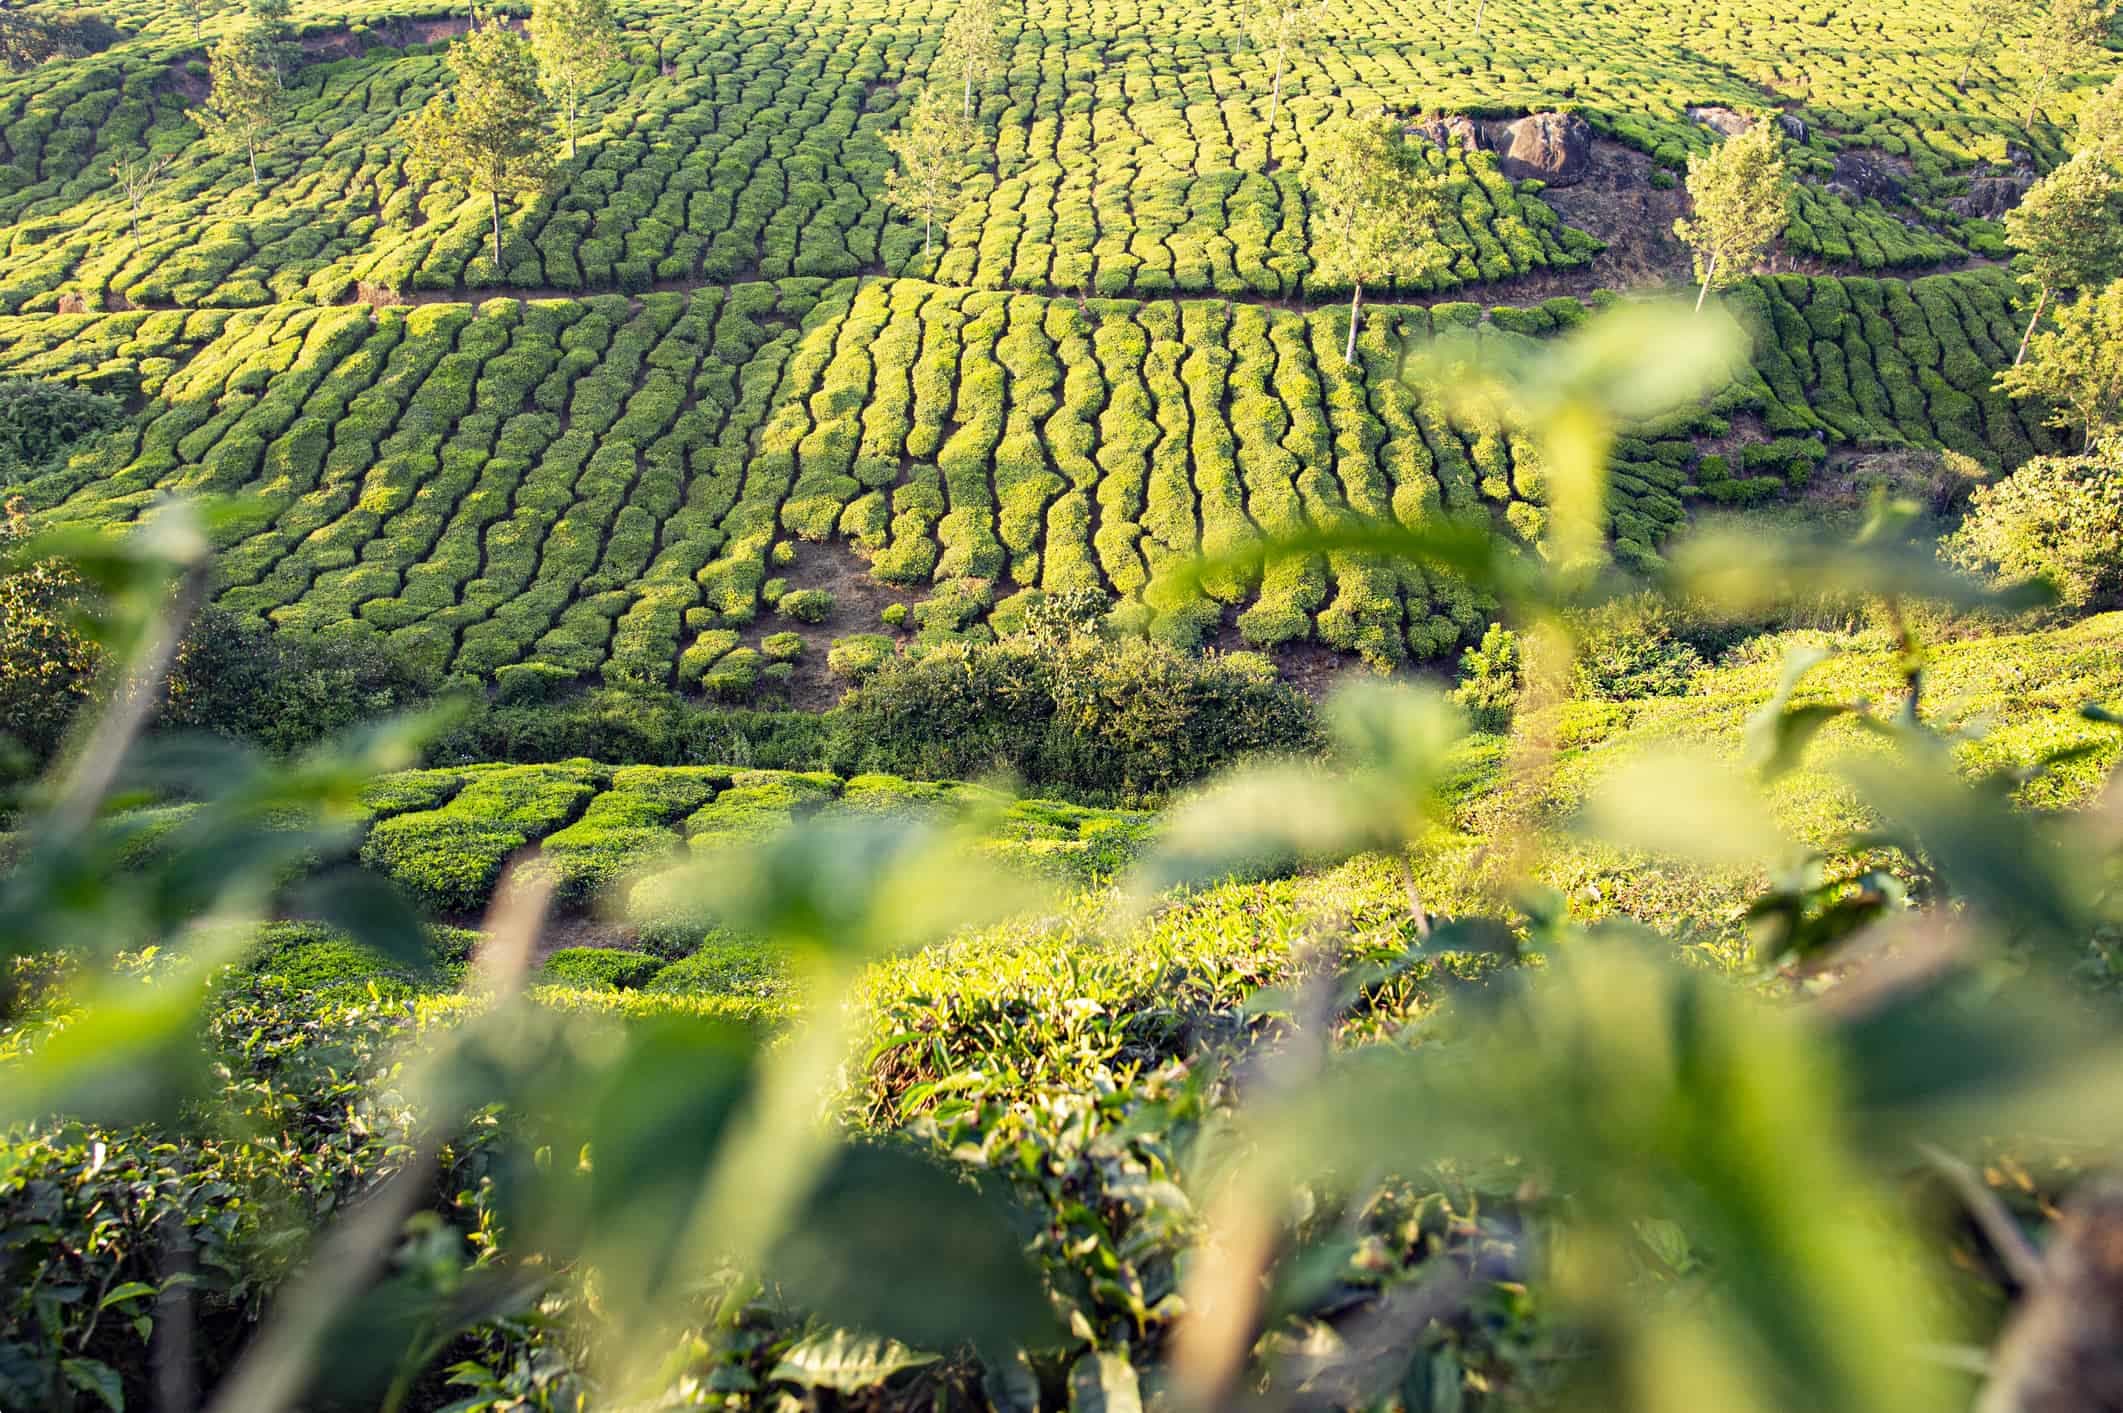 Stunning view of a green tea plantation during a beautiful sunset. Darjeeling tea is a tea grown in the Darjeeling district, Kalimpong District in West Bengal, India.